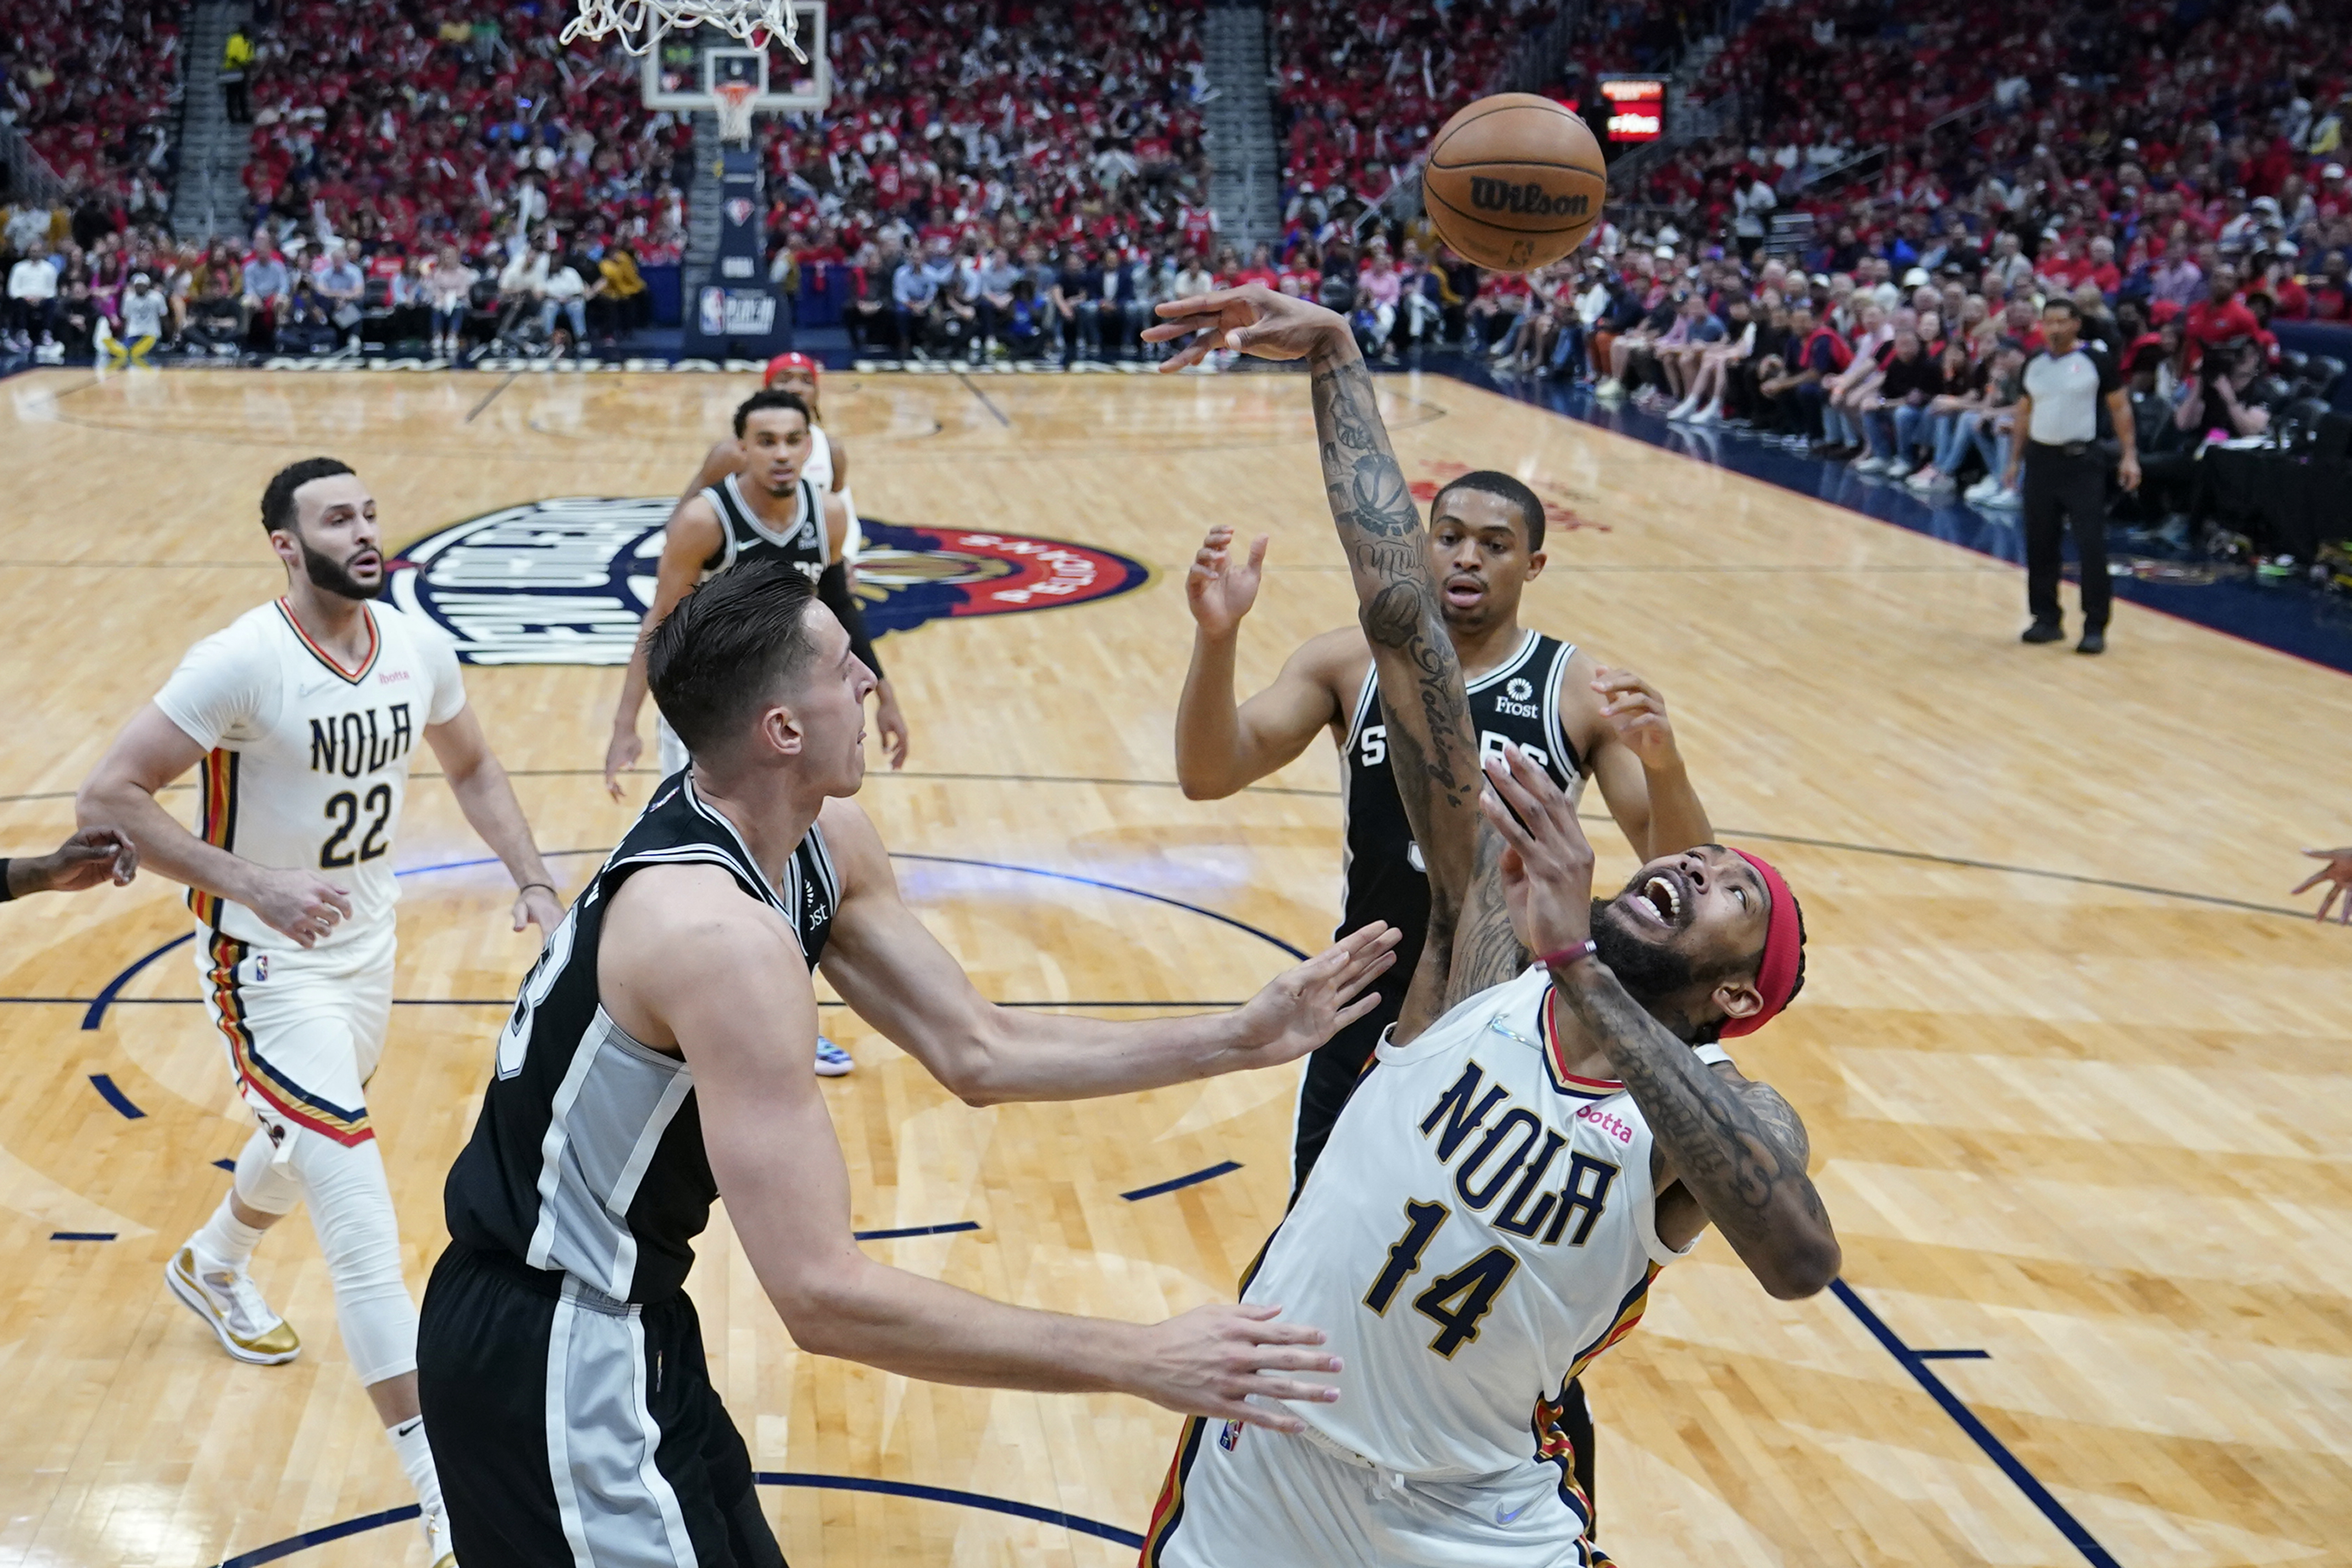 CJ McCollum leads Pelicans past Spurs in play-in game